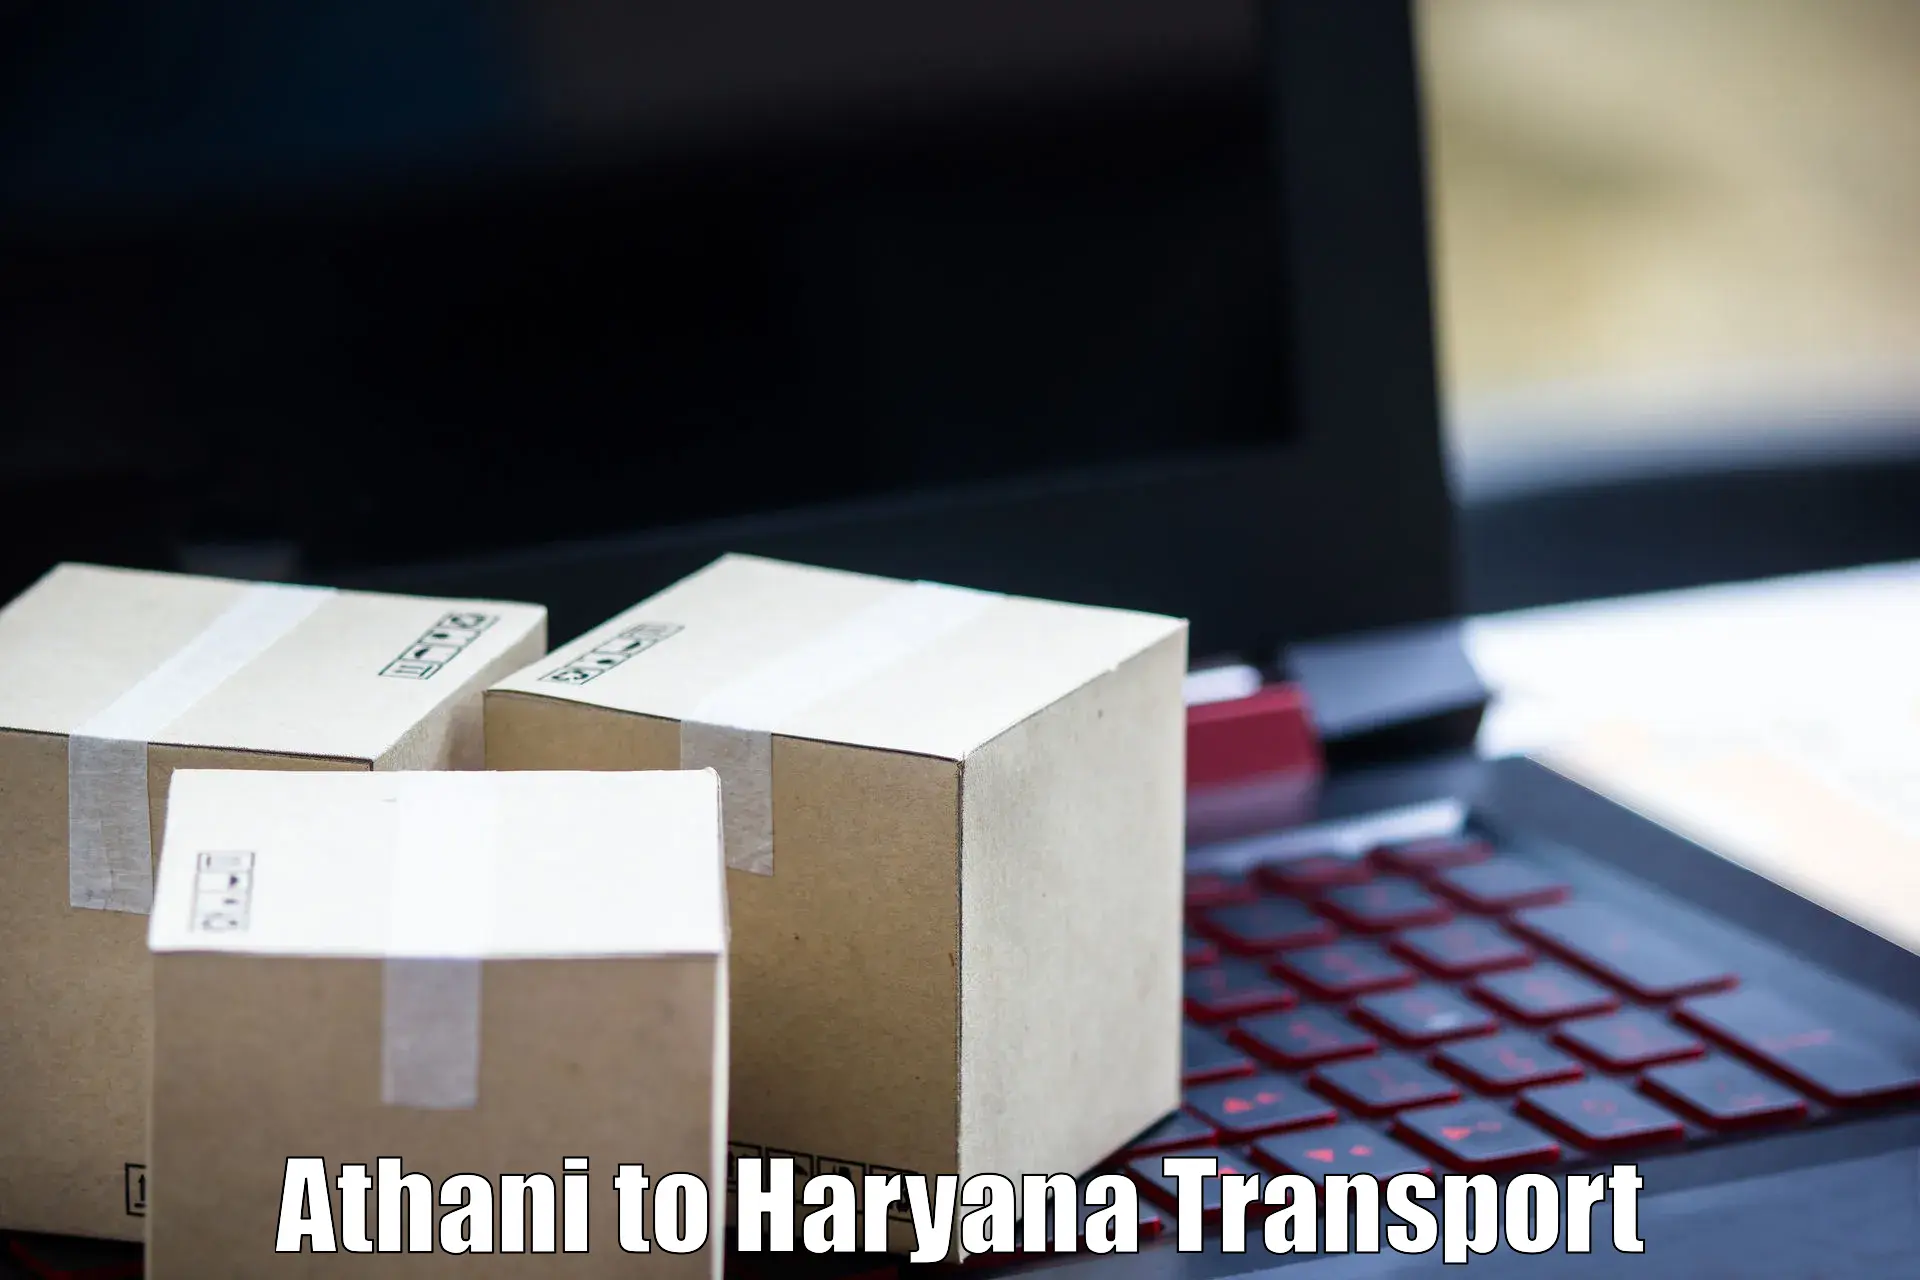 Air freight transport services in Athani to Gohana